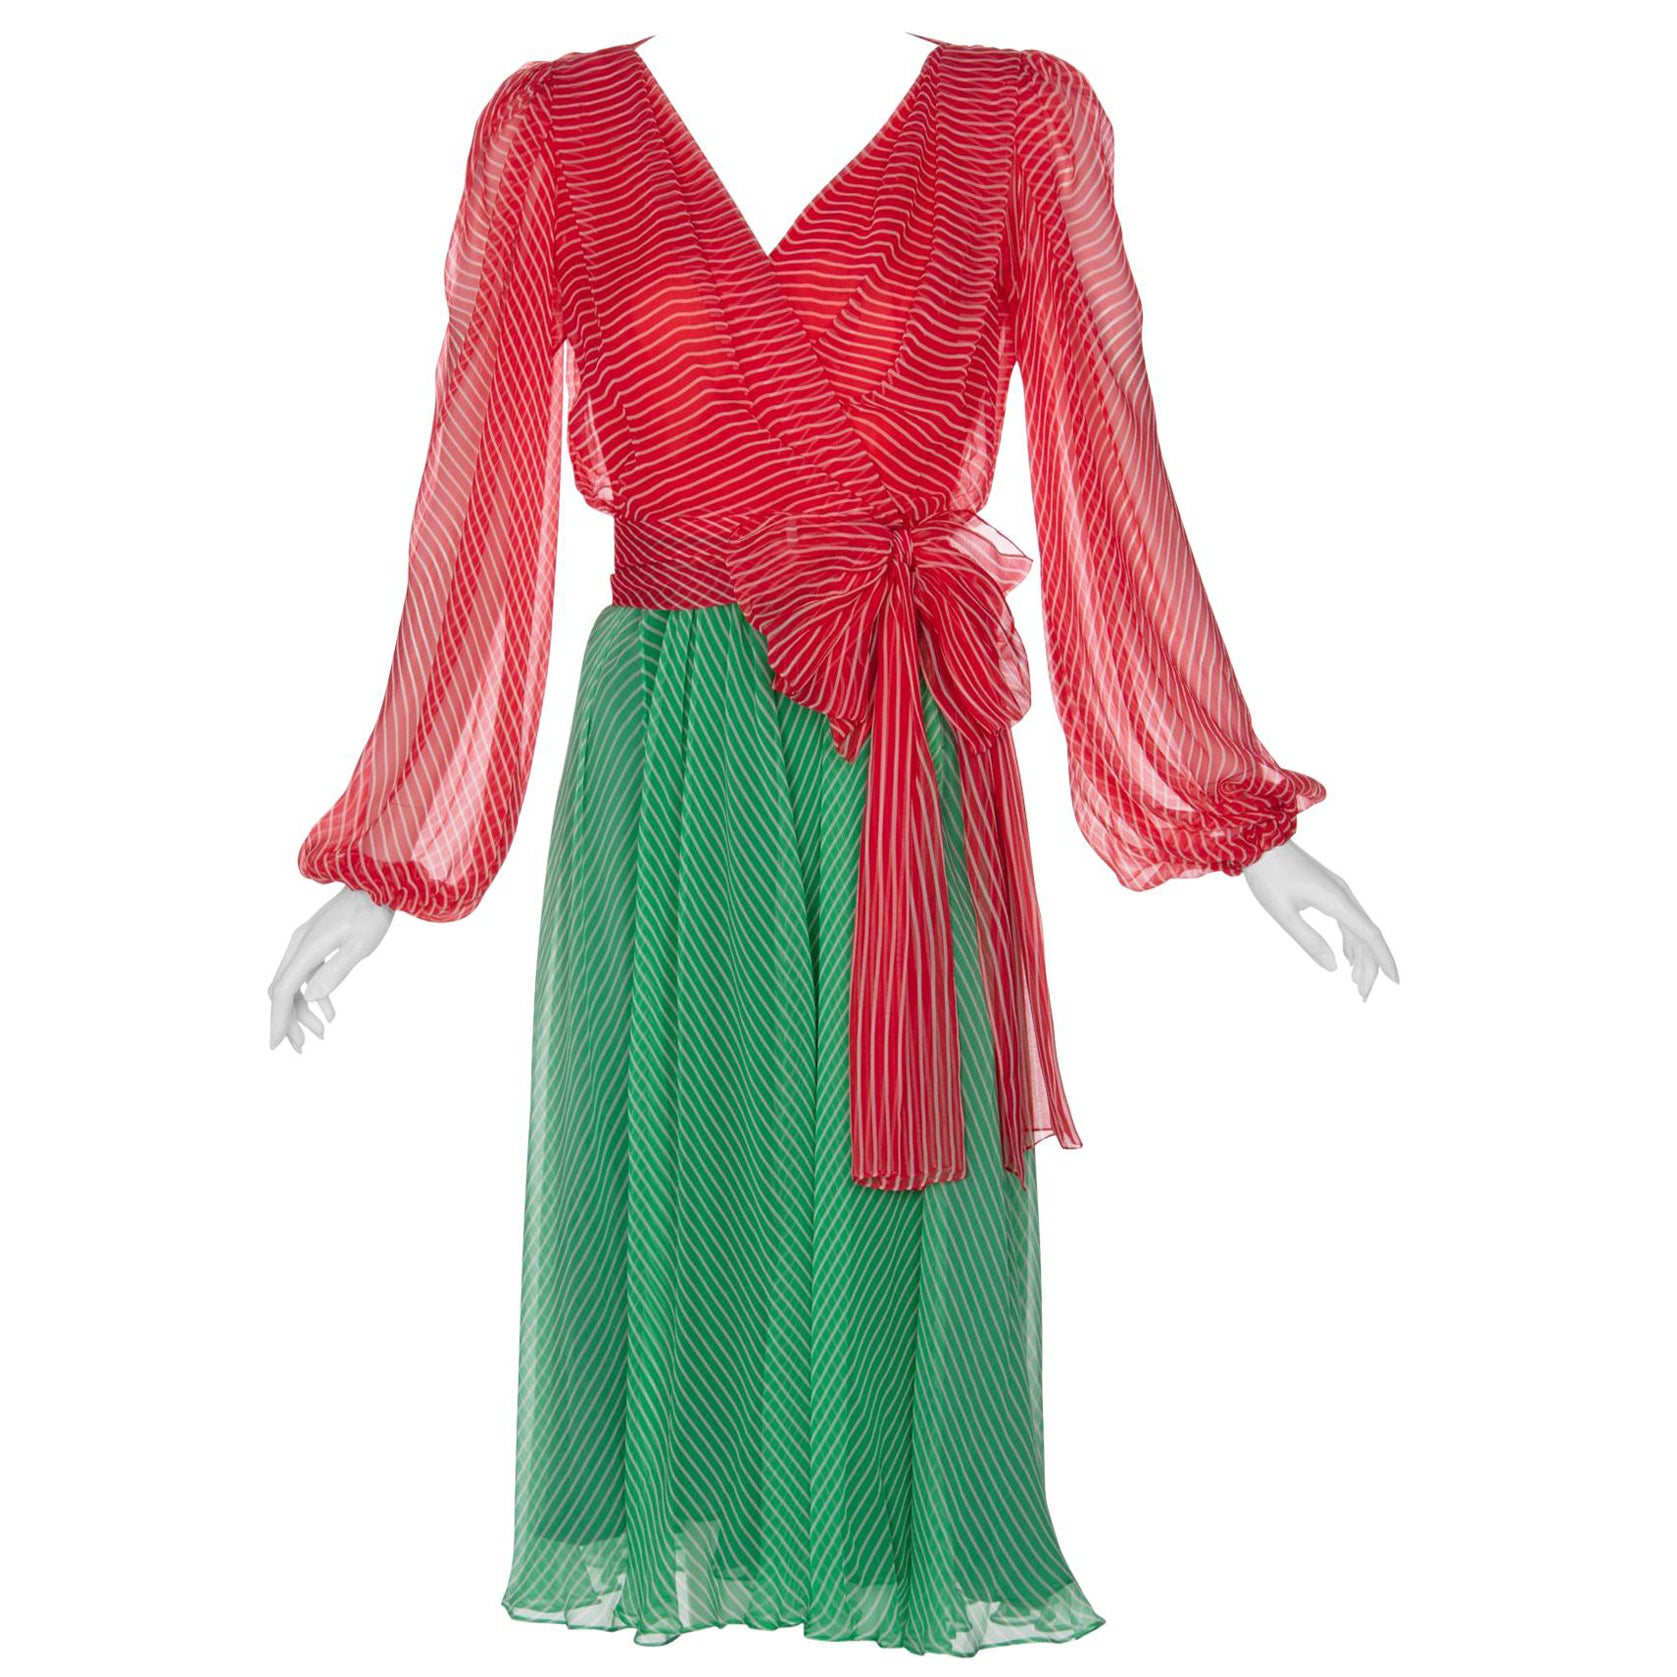 Yves Saint Laurent YSL Haute Couture Red / Green Stripe Silk Chiffon Dress, 1991 For Sale